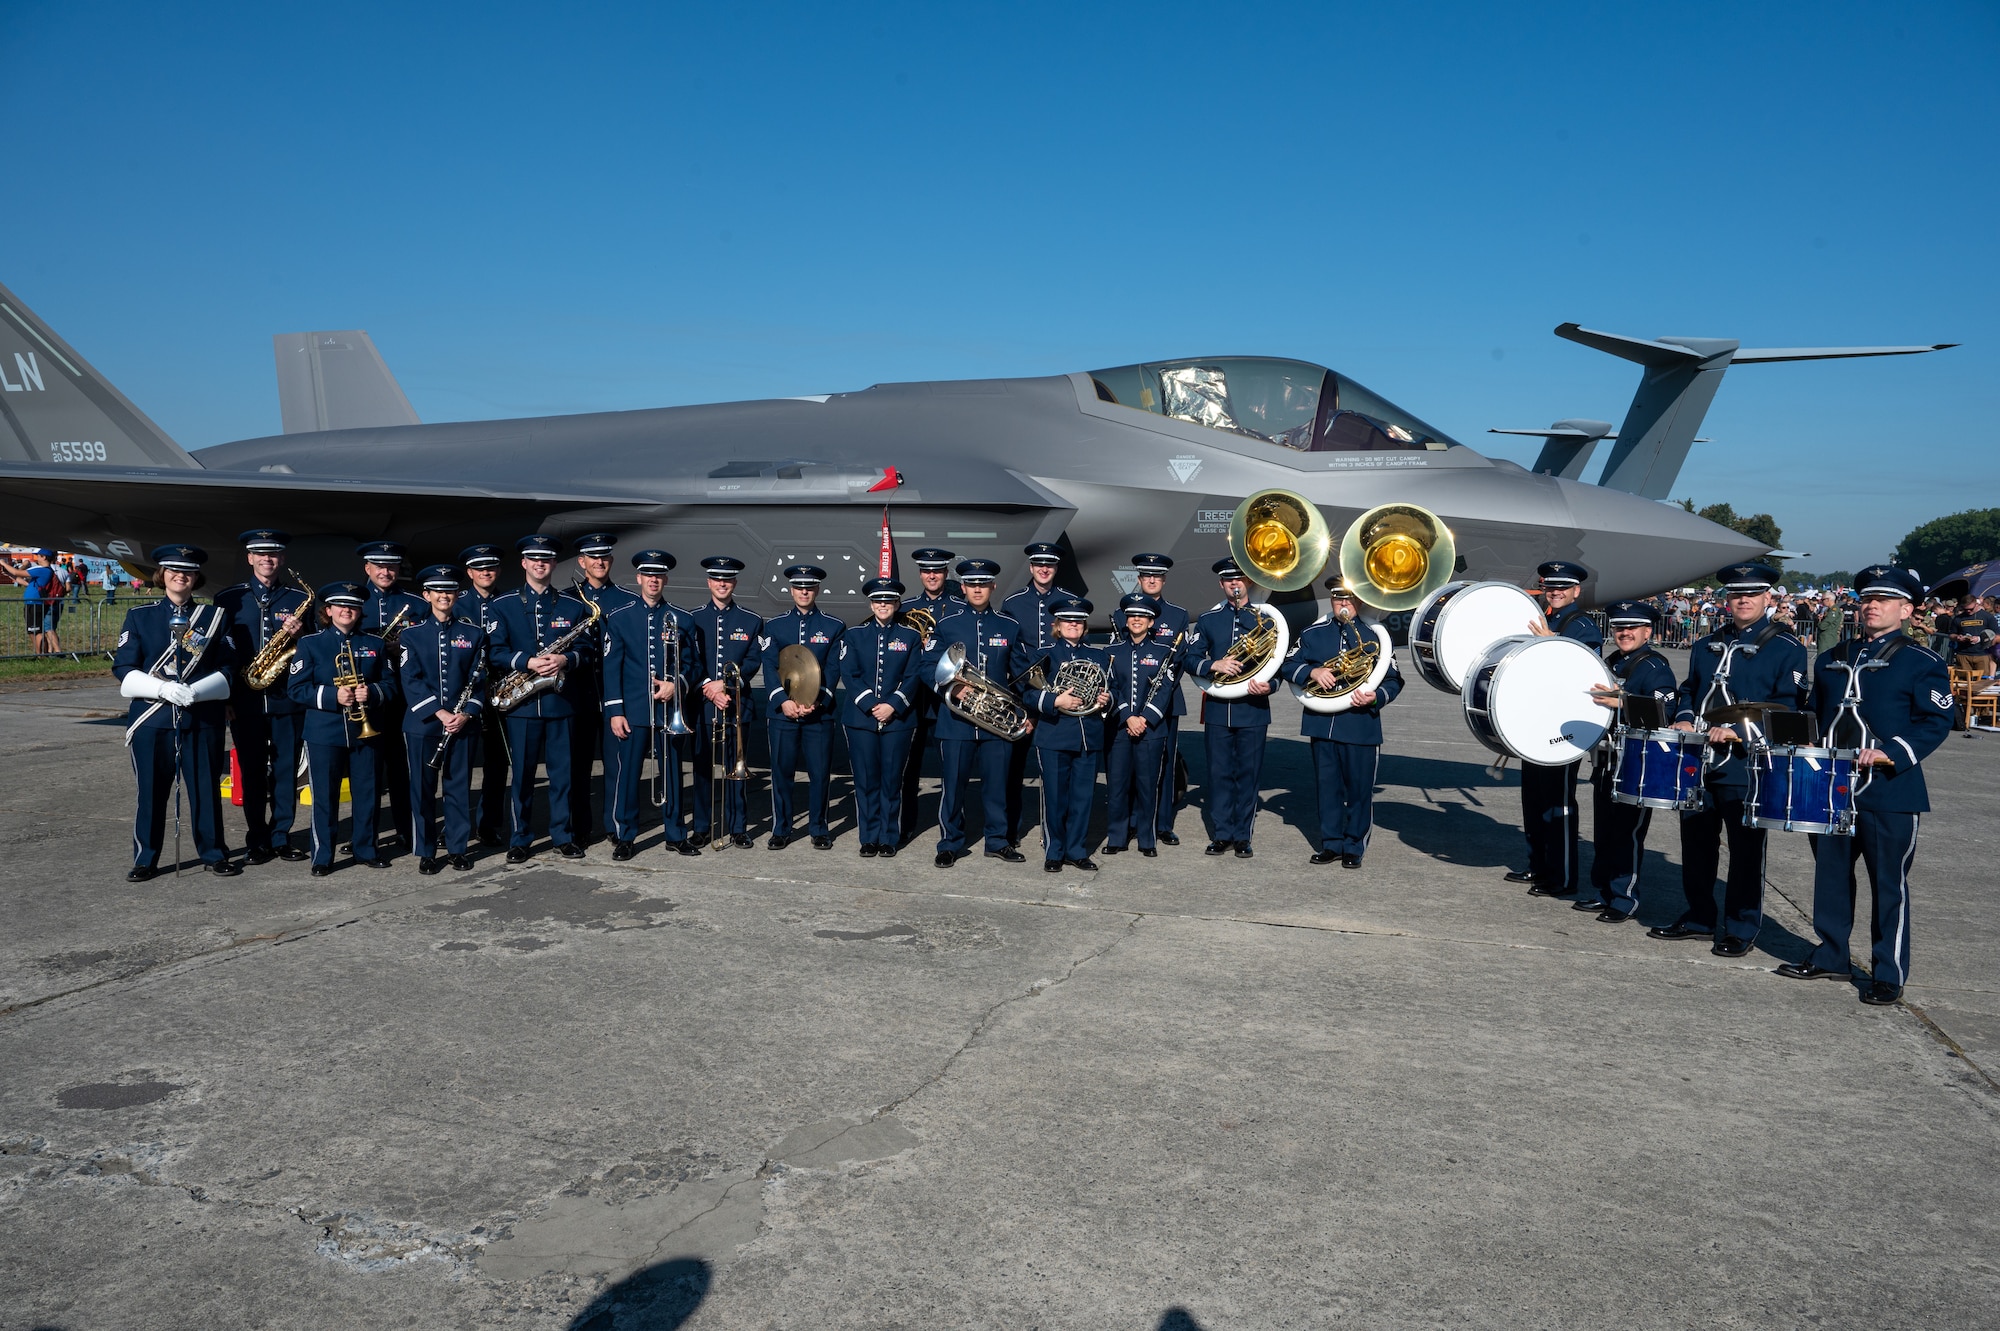 U.S. Air Force Airmen assigned to the U.S. Air Forces in Europe Ceremonial Band, stand together in front of F-35A Lightning II aircraft from the 48th Fighter Wing, Royal Air Force Lakenheath, England, during the NATO Days event at Leoš Janáček Airport in Ostrava, Czech Republic, Sept. 16, 2023.